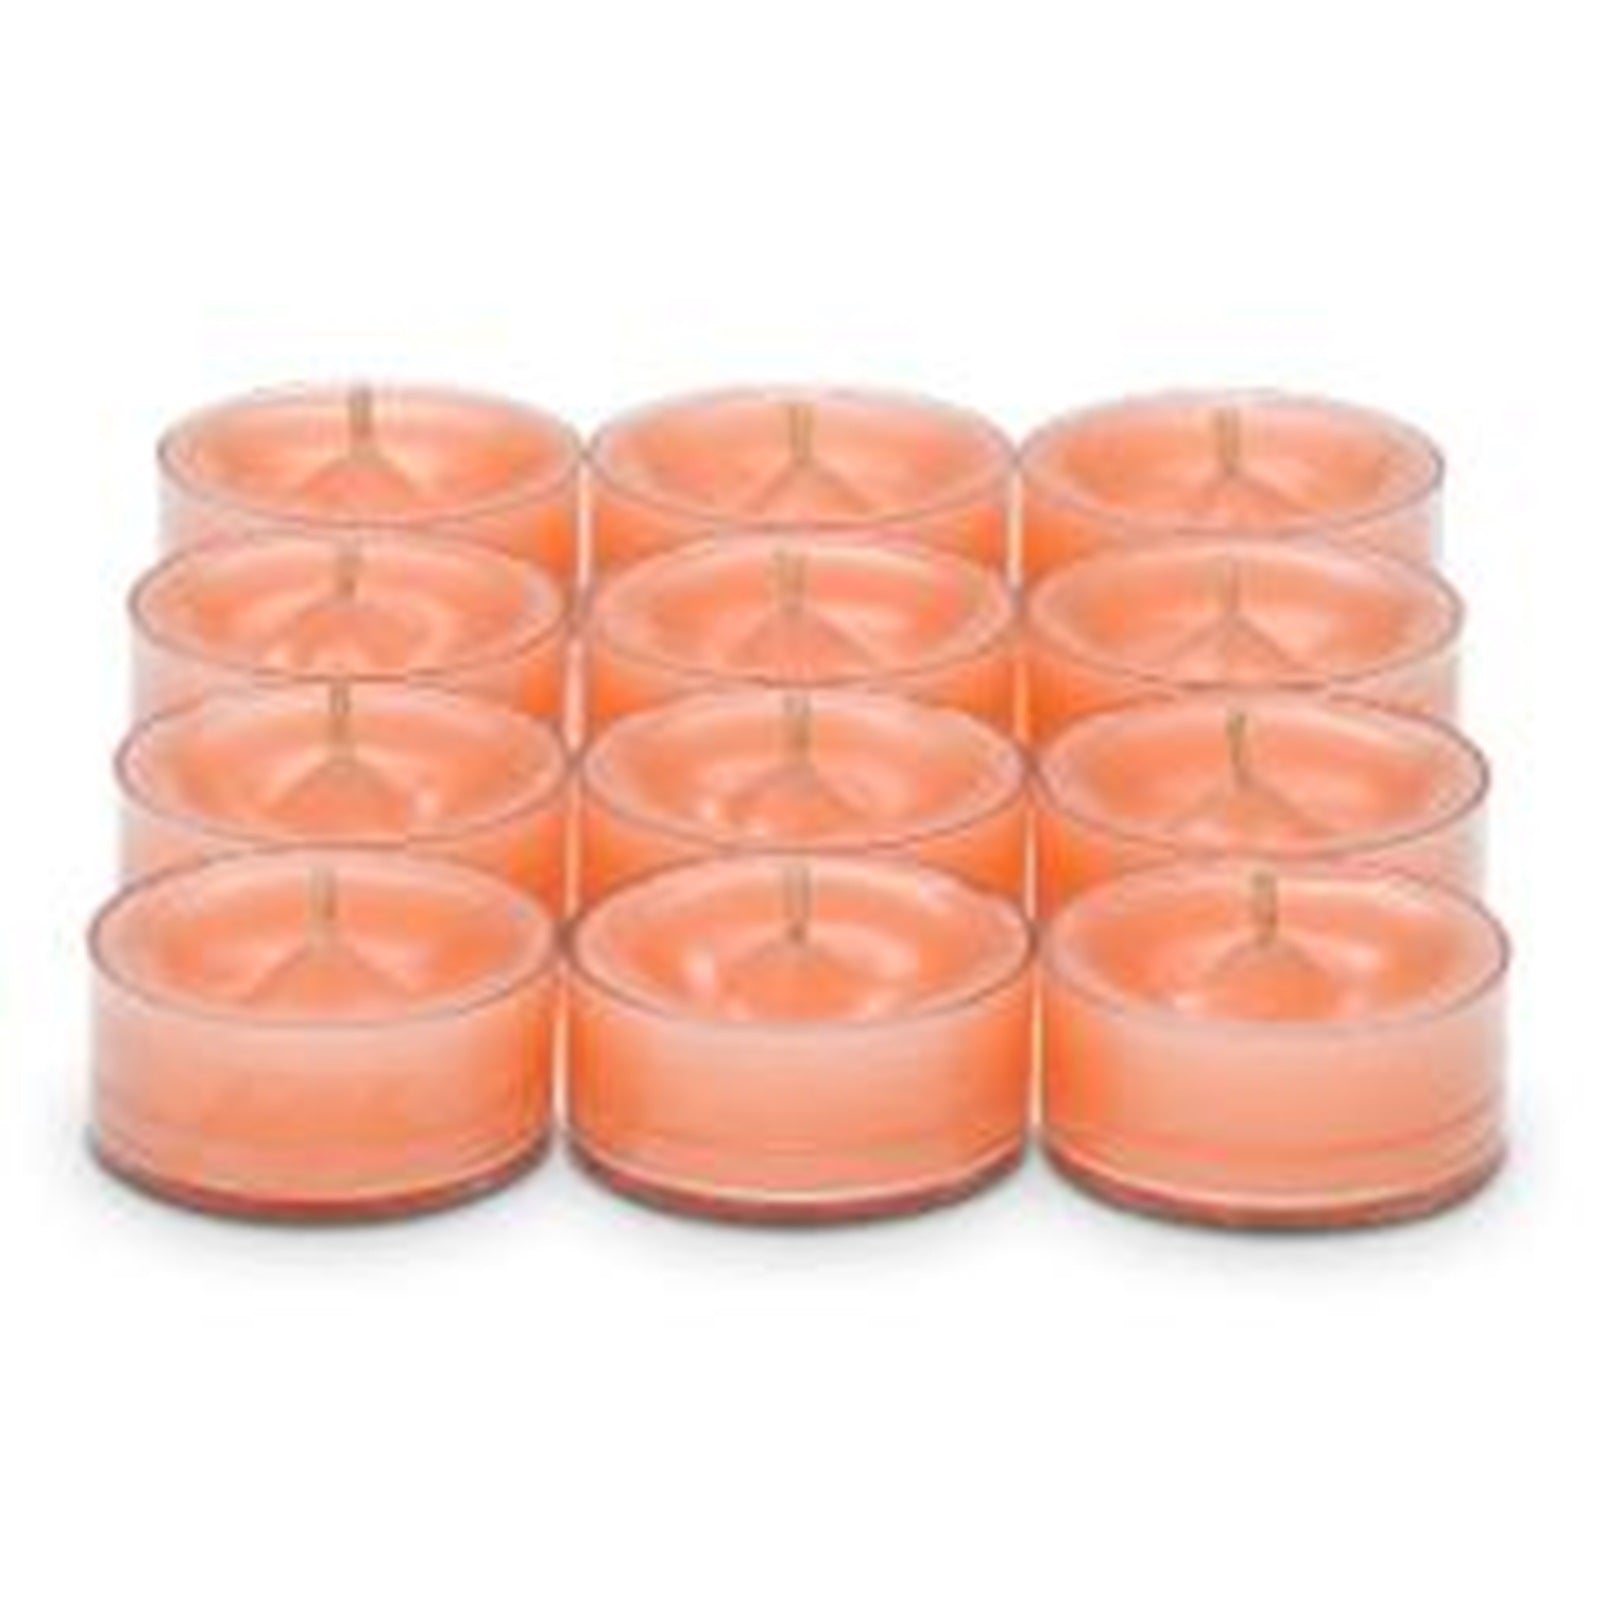 PartyLite Tealight Candles - 1 Box - 1 Dozen Tealights - 12 APRICOT DAISY SCENTED WAX